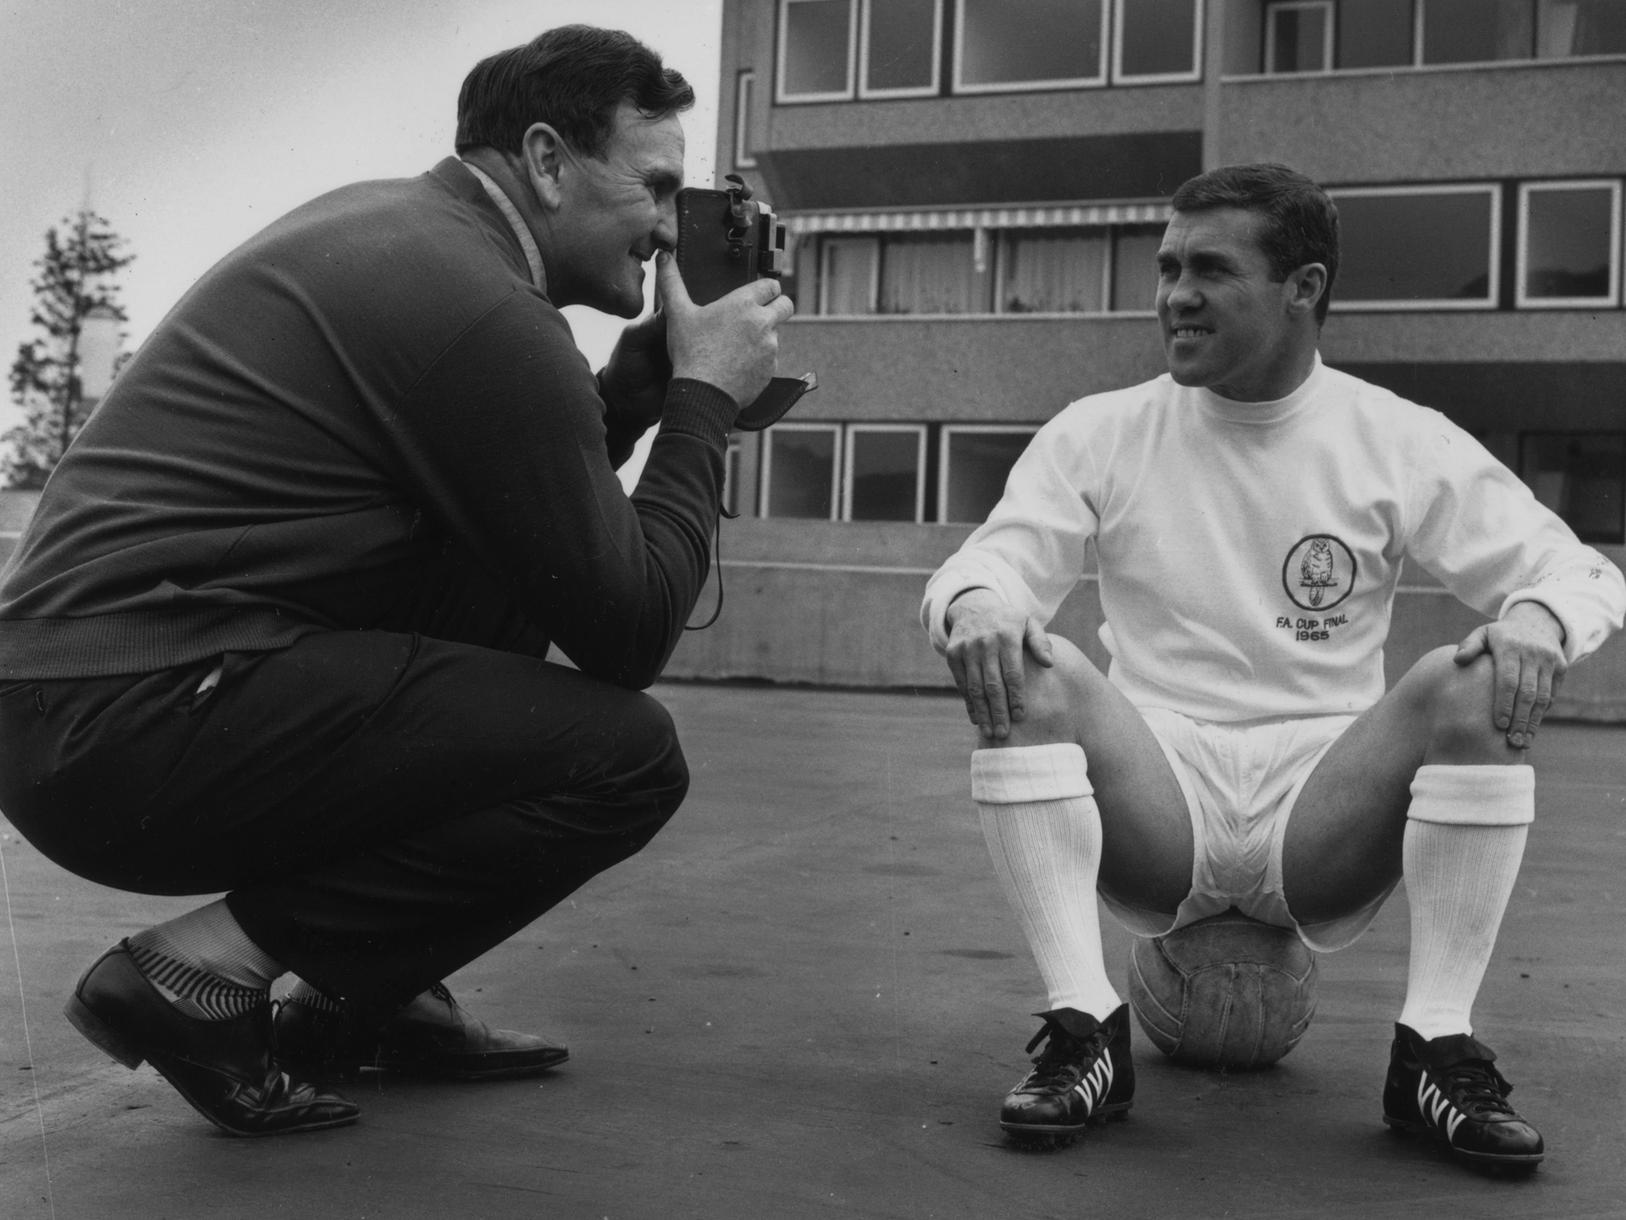 An astute addition to the Leeds squad by manager Don Revie in 1962, helping the club avoid relegation. Revie later described Collins as his best ever signing.